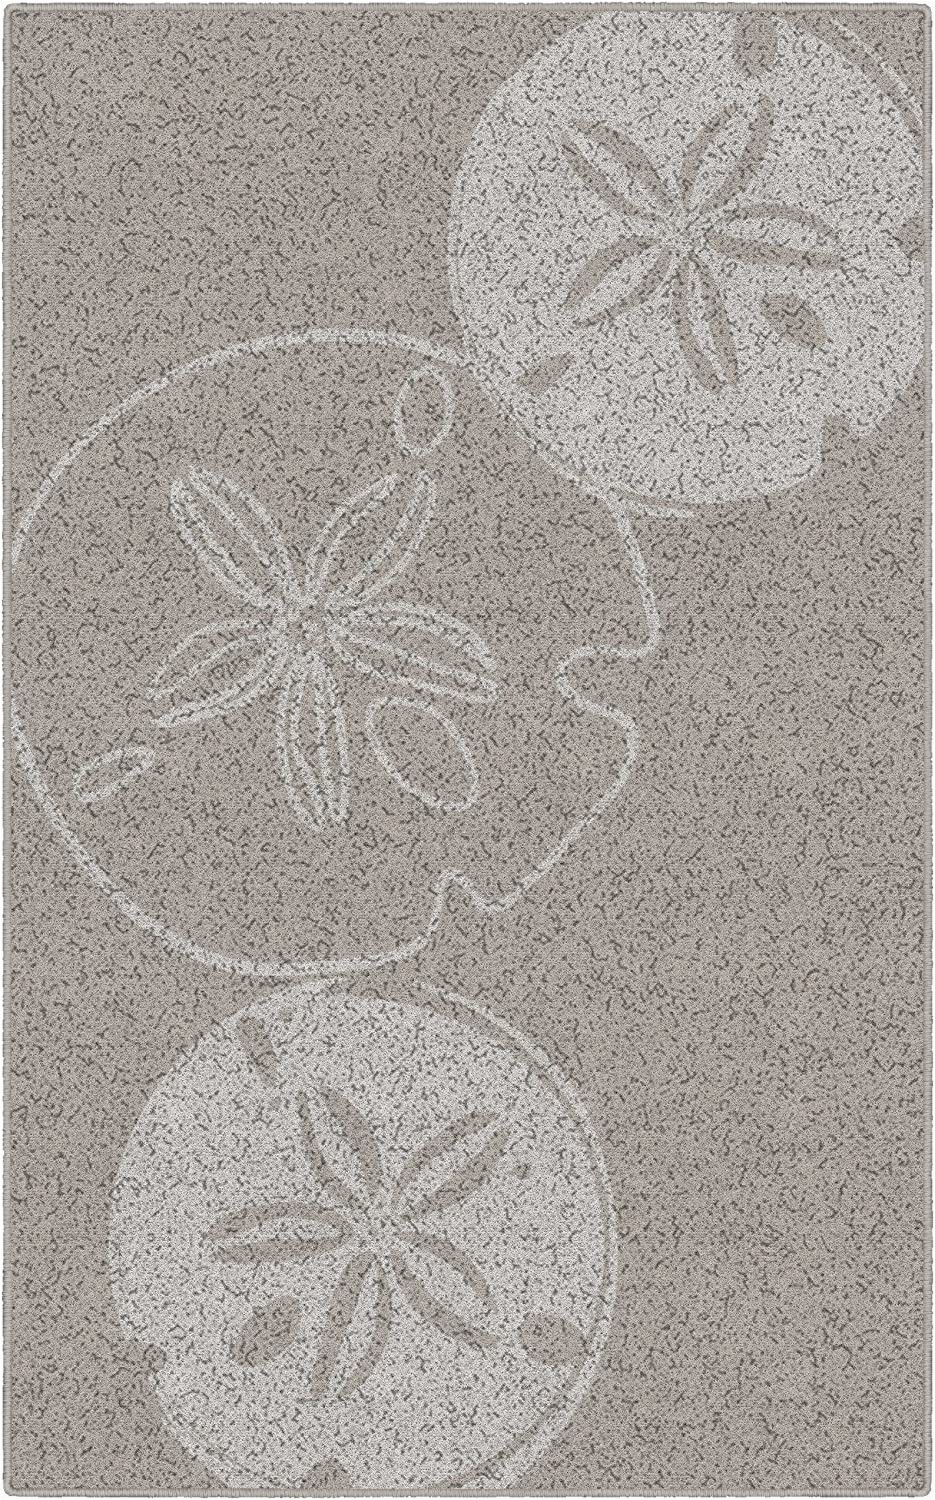 Madison Park Tradewinds Bath Rug Brumlow Mills Sand Dollars Beach and Ocean area Rug for Kitchen Deck Patio or Home Decor 2 6" X 3 10" Beige